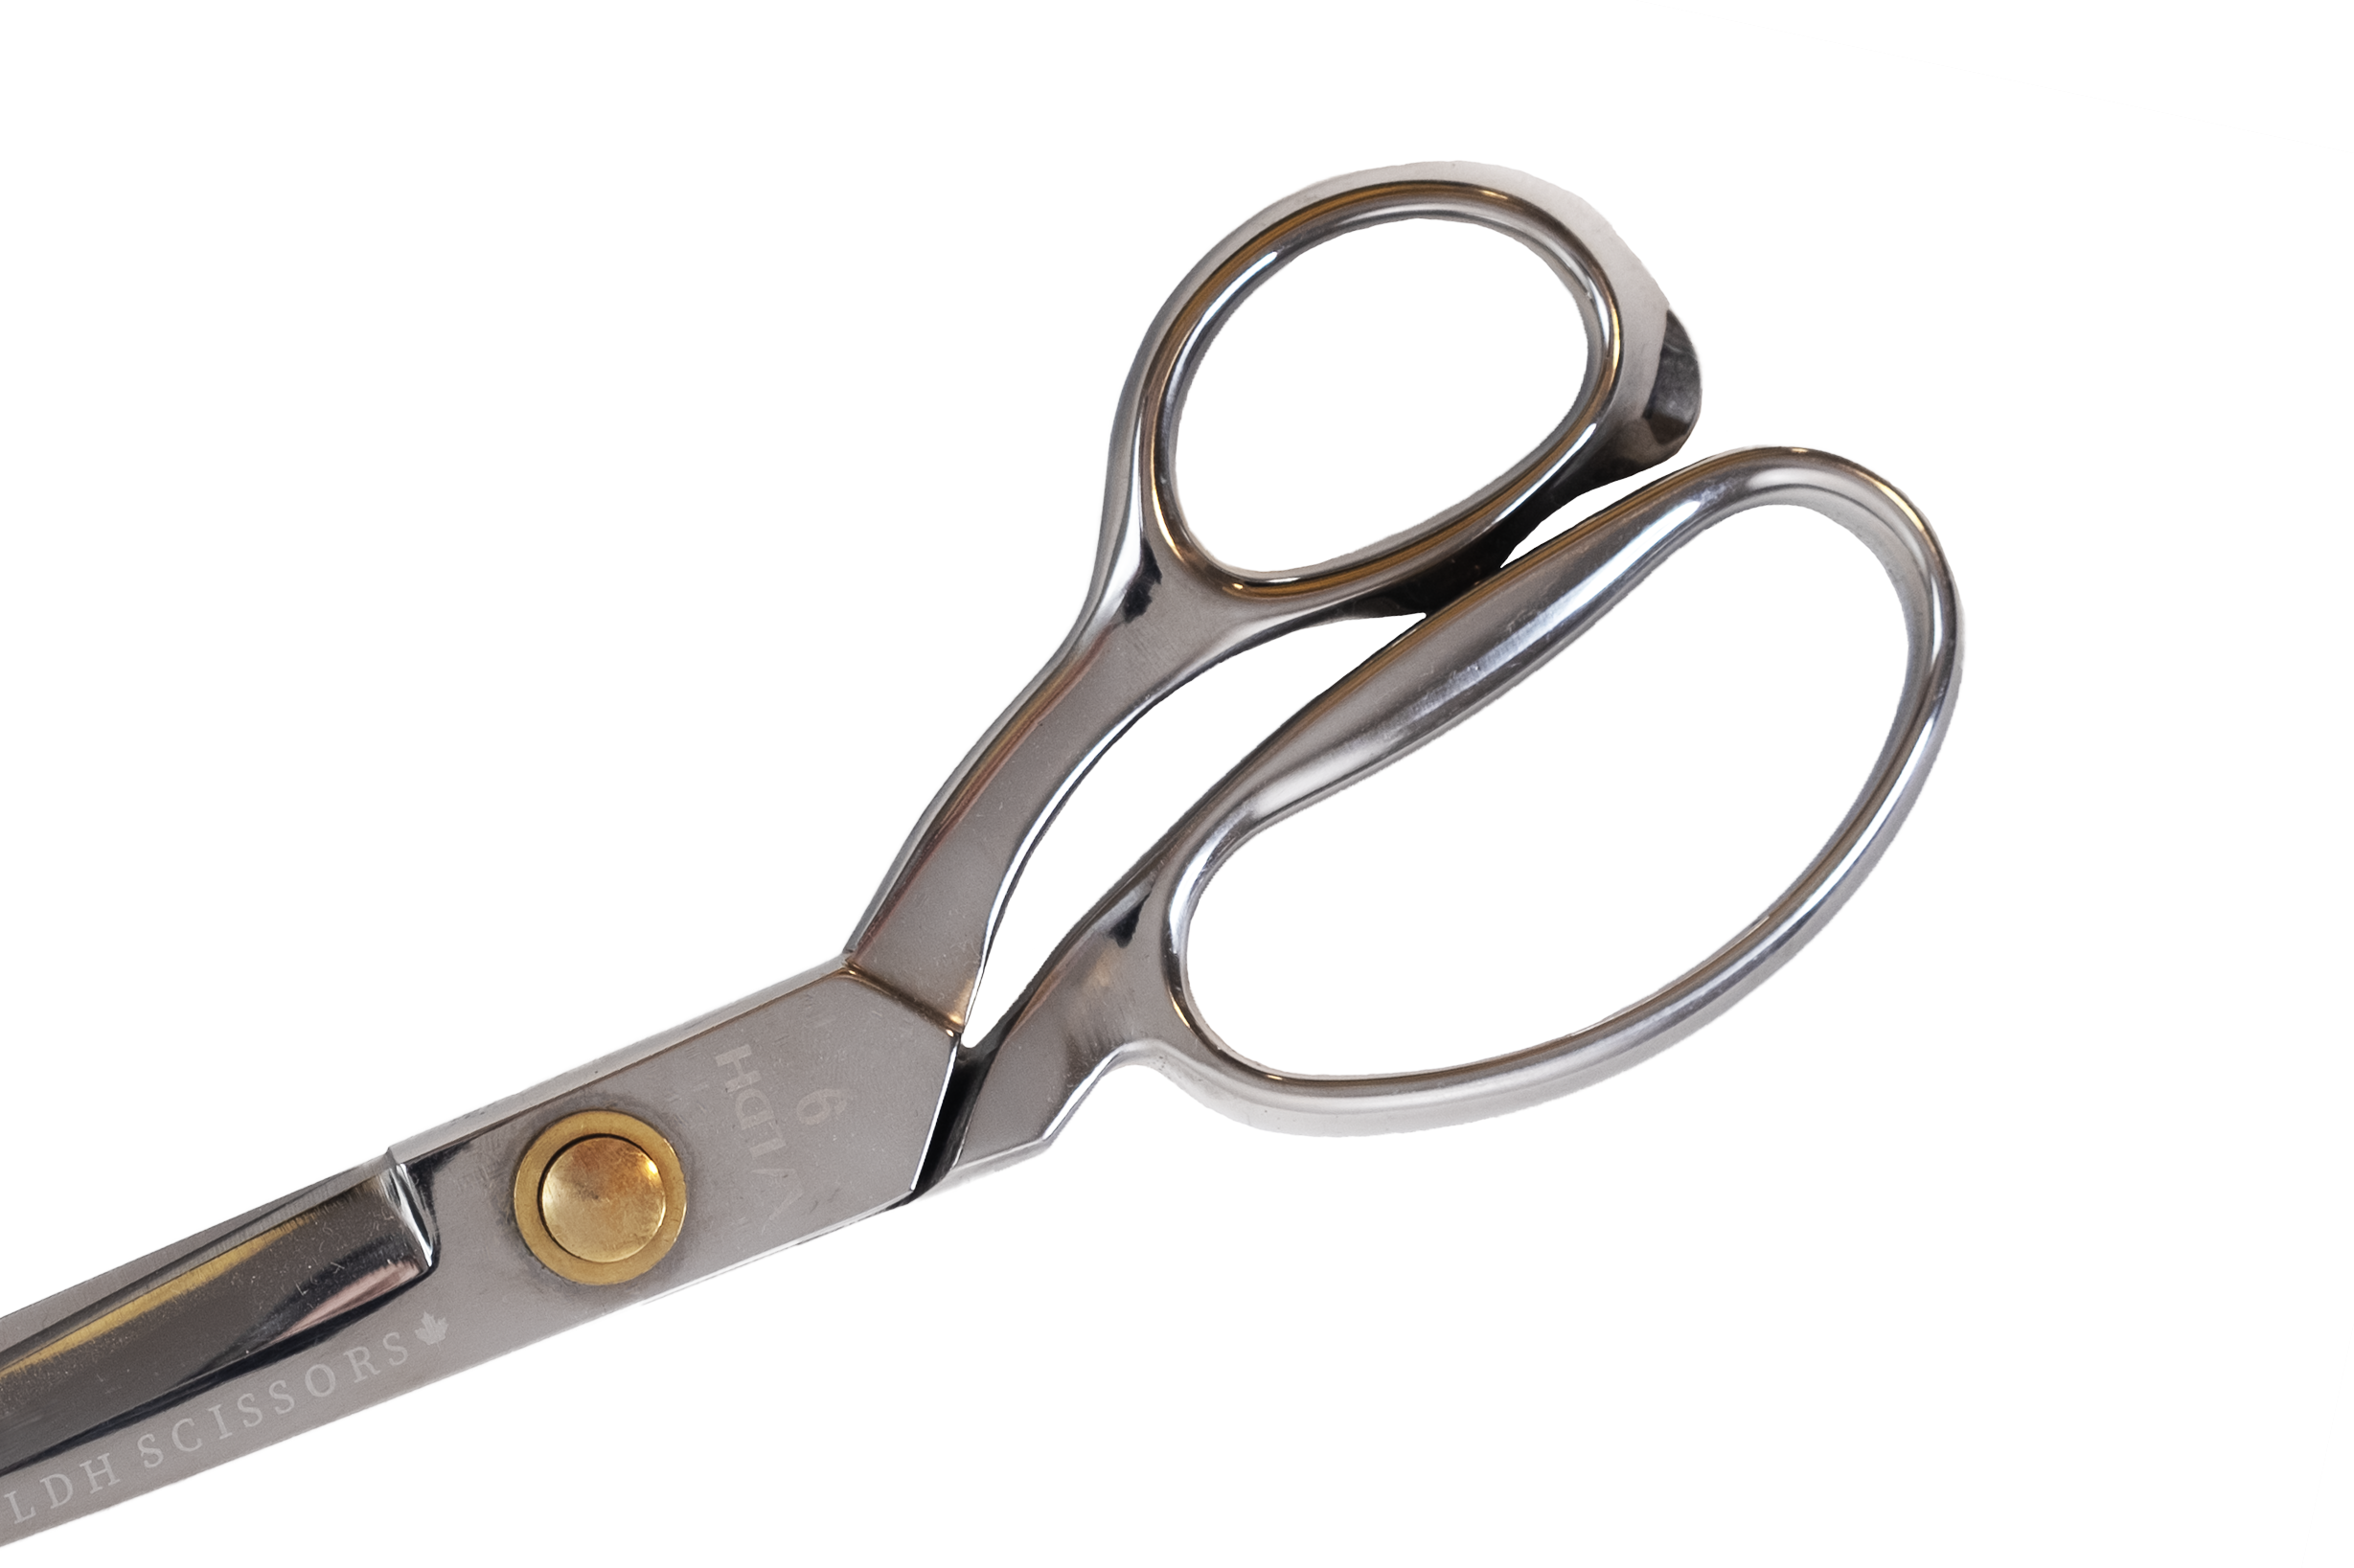  Stainless Steel Fabric Shears